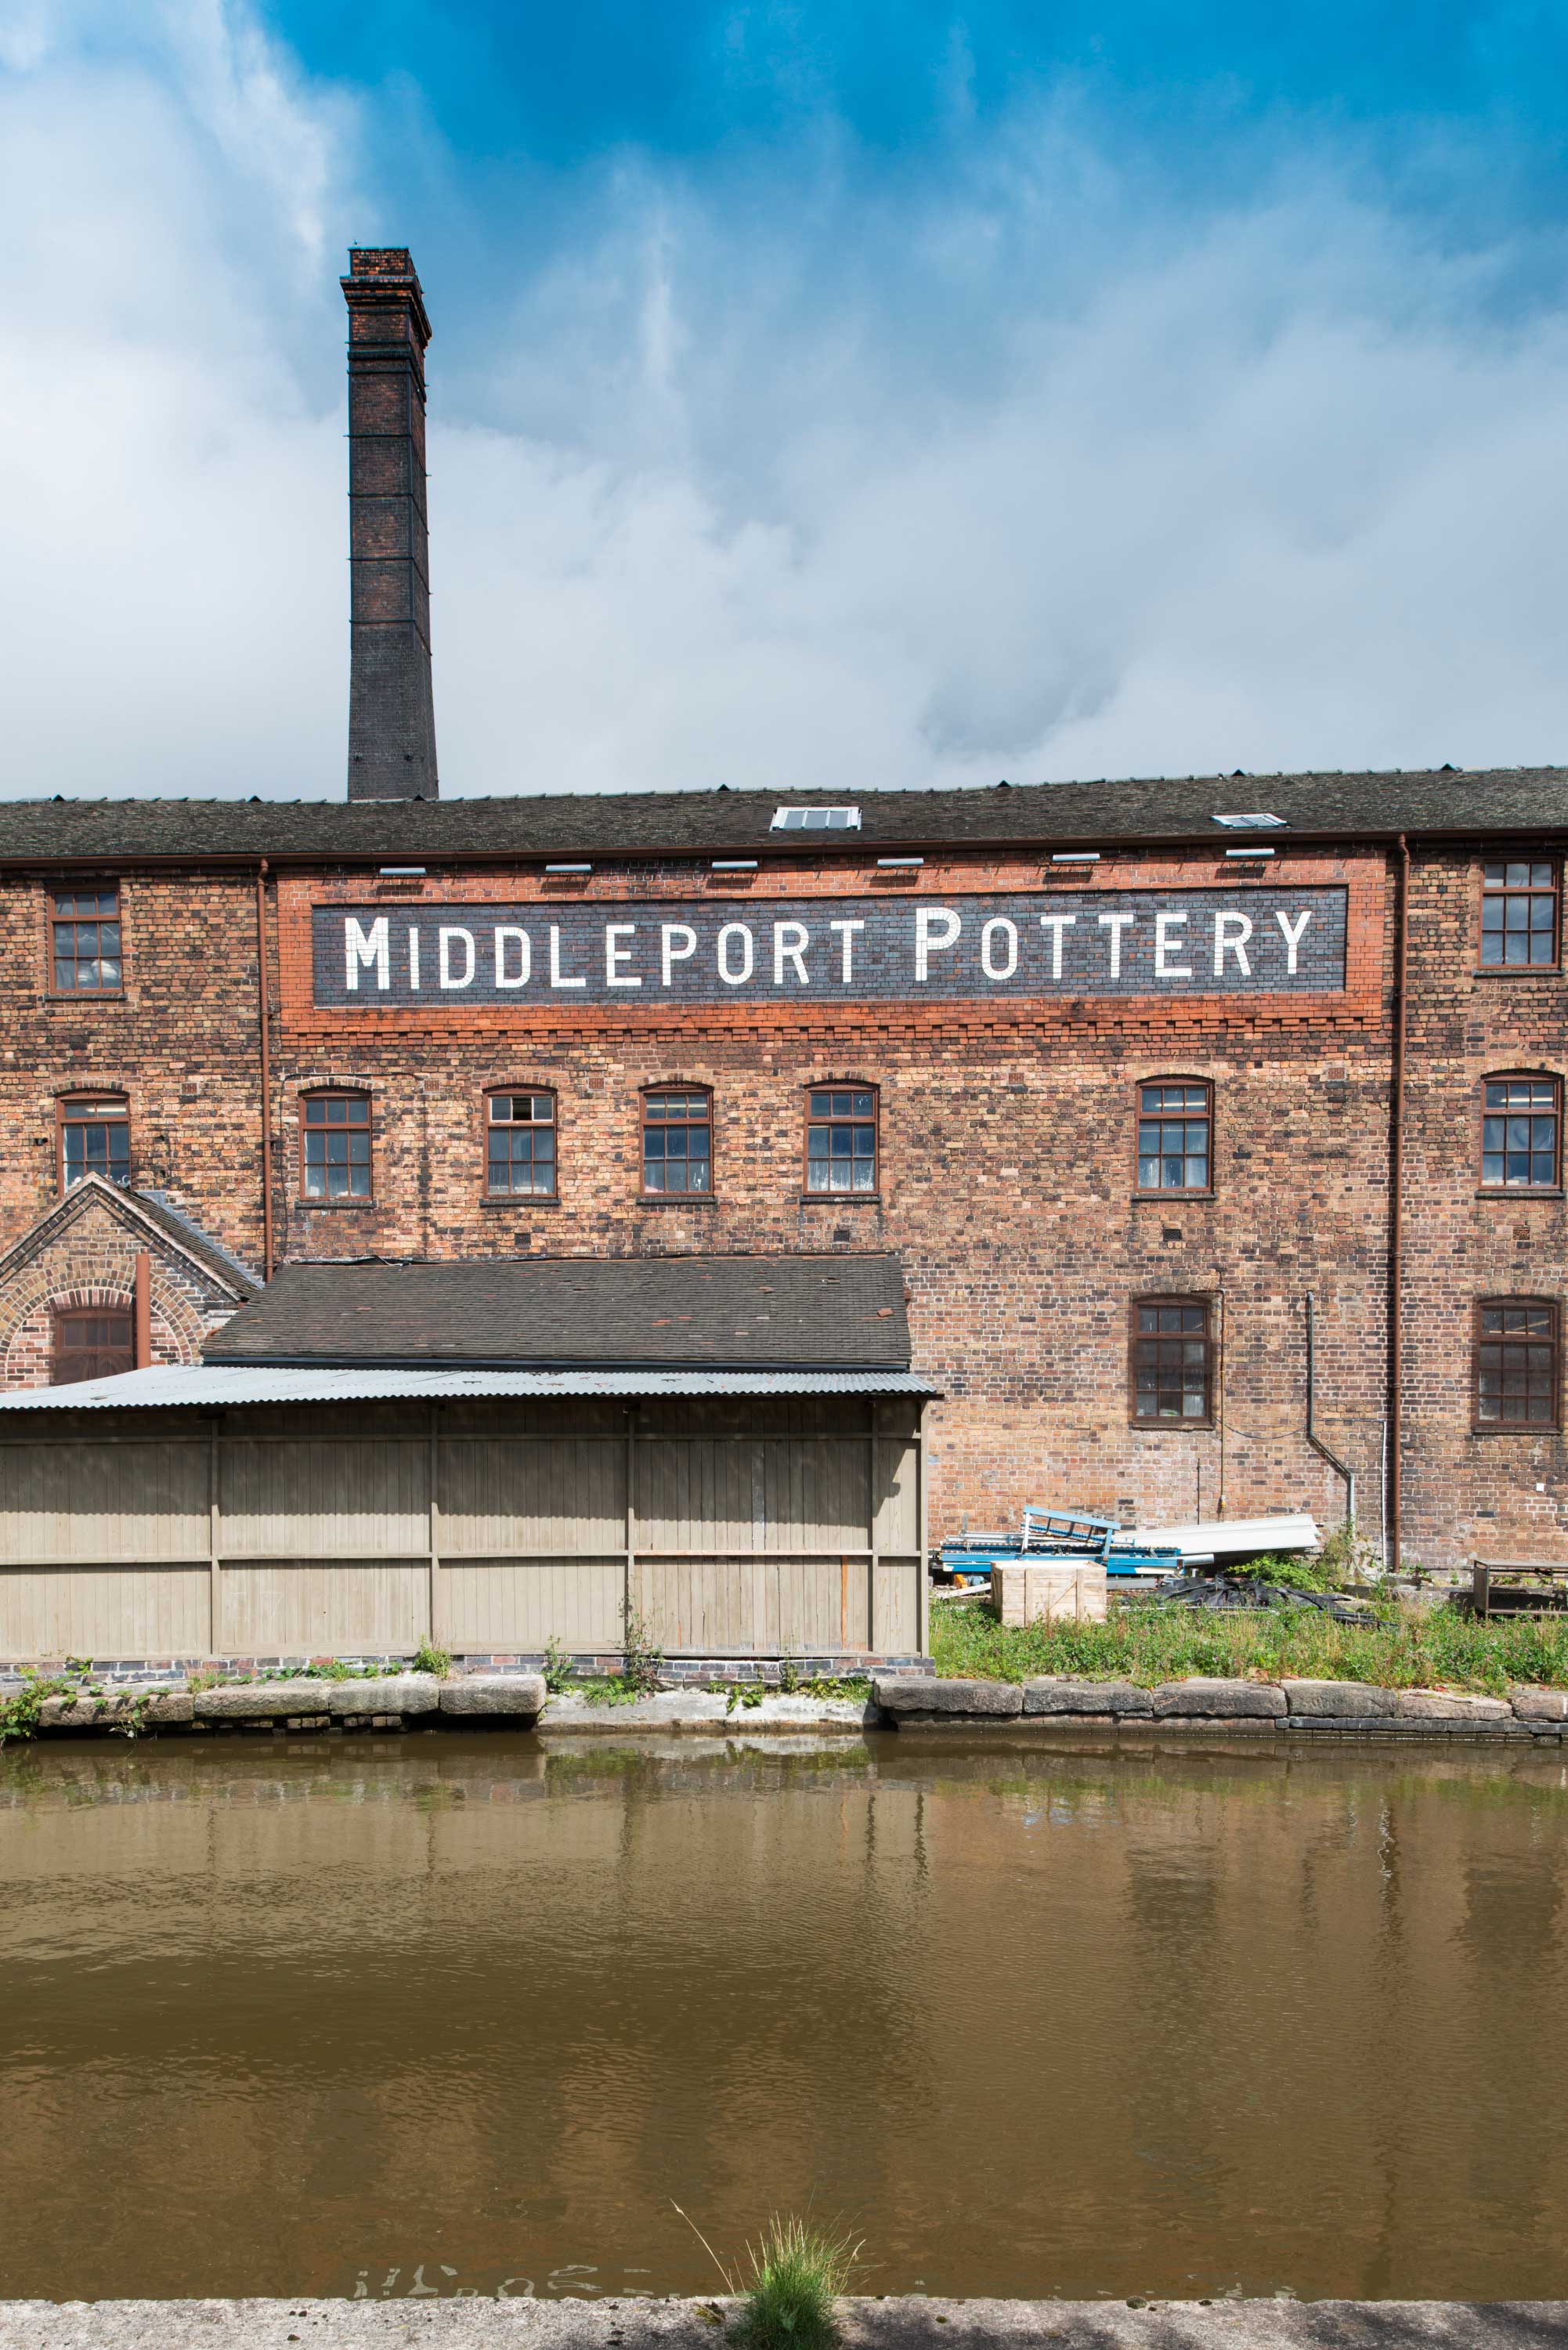 View across the Mersey canal to Middleport Pottery, Burslem, Stoke-on-Trent.